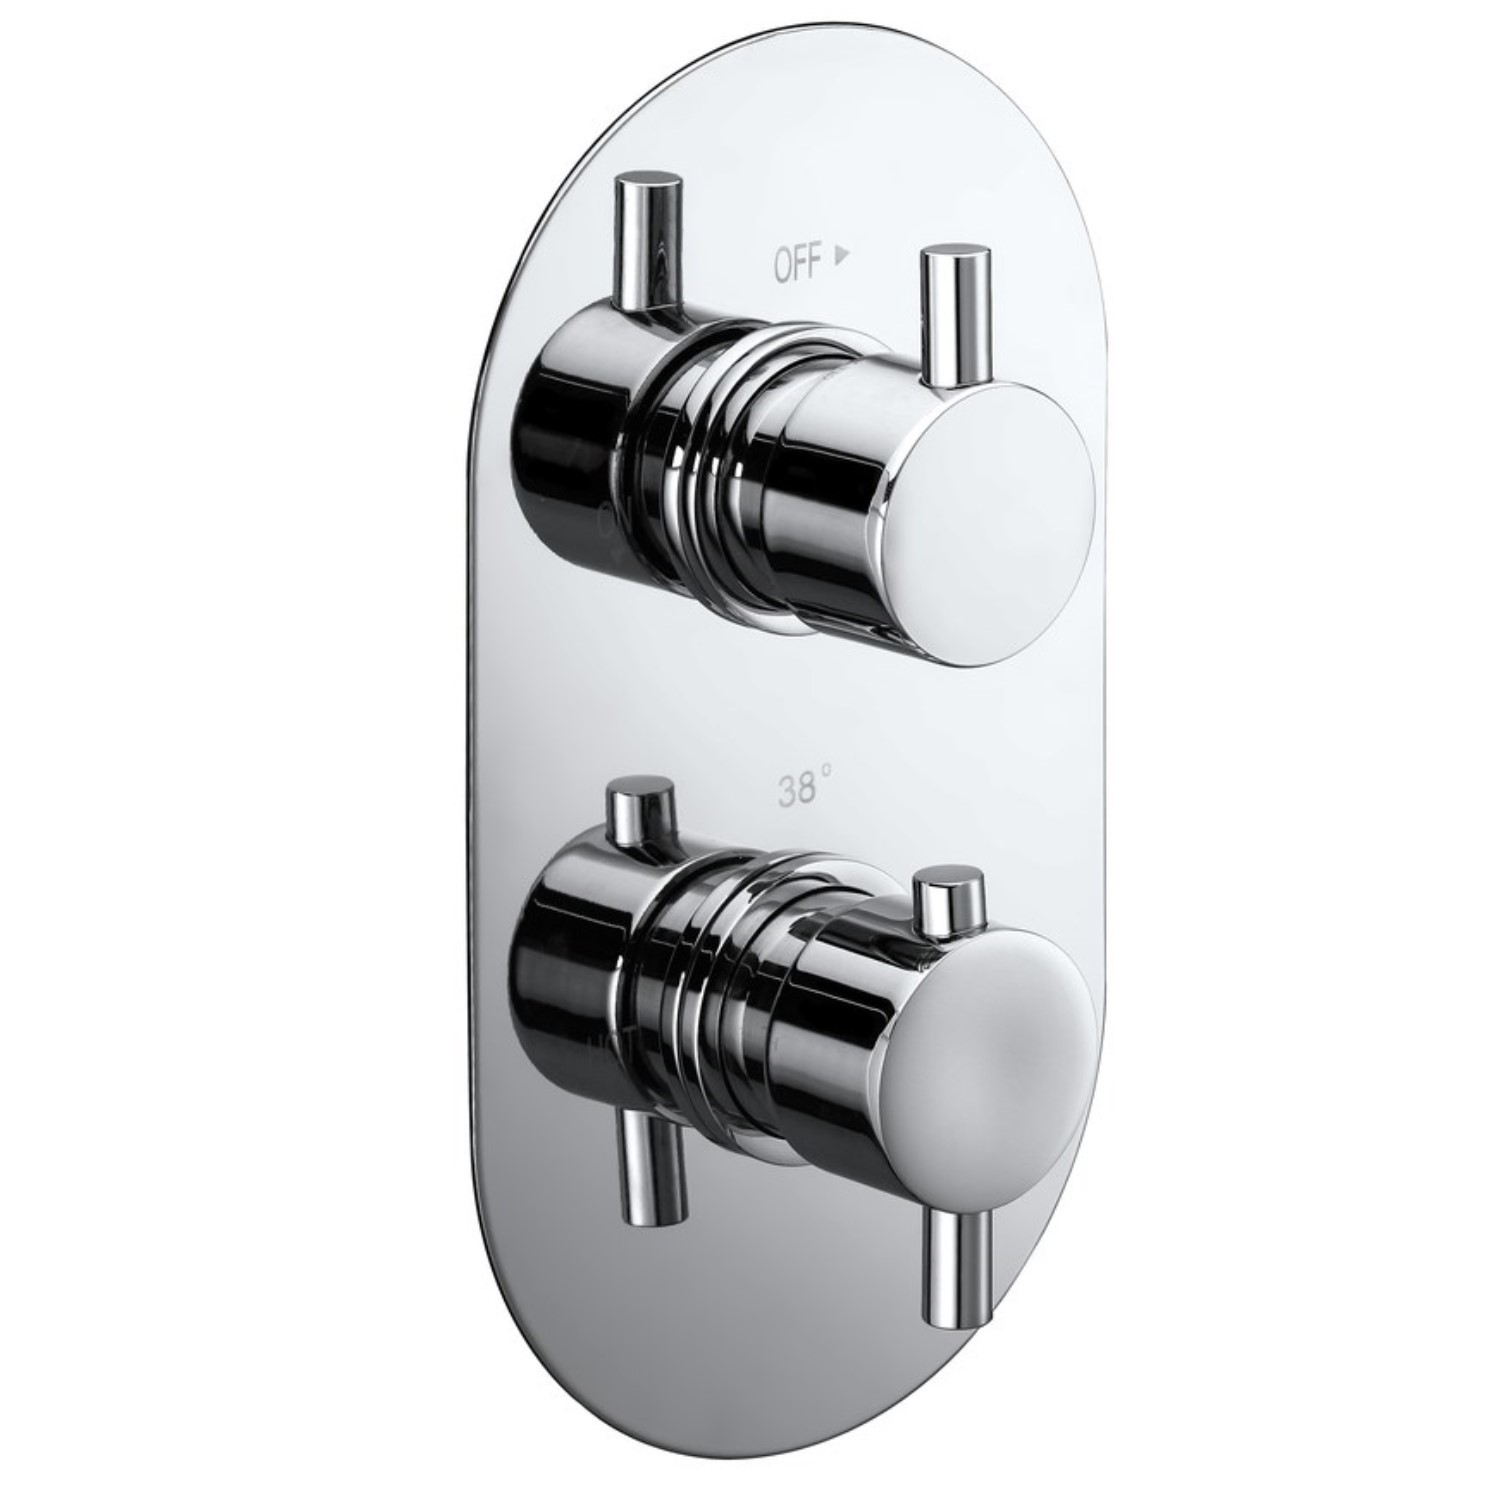 Flow round twin shower valve with diverter - 2 outlets